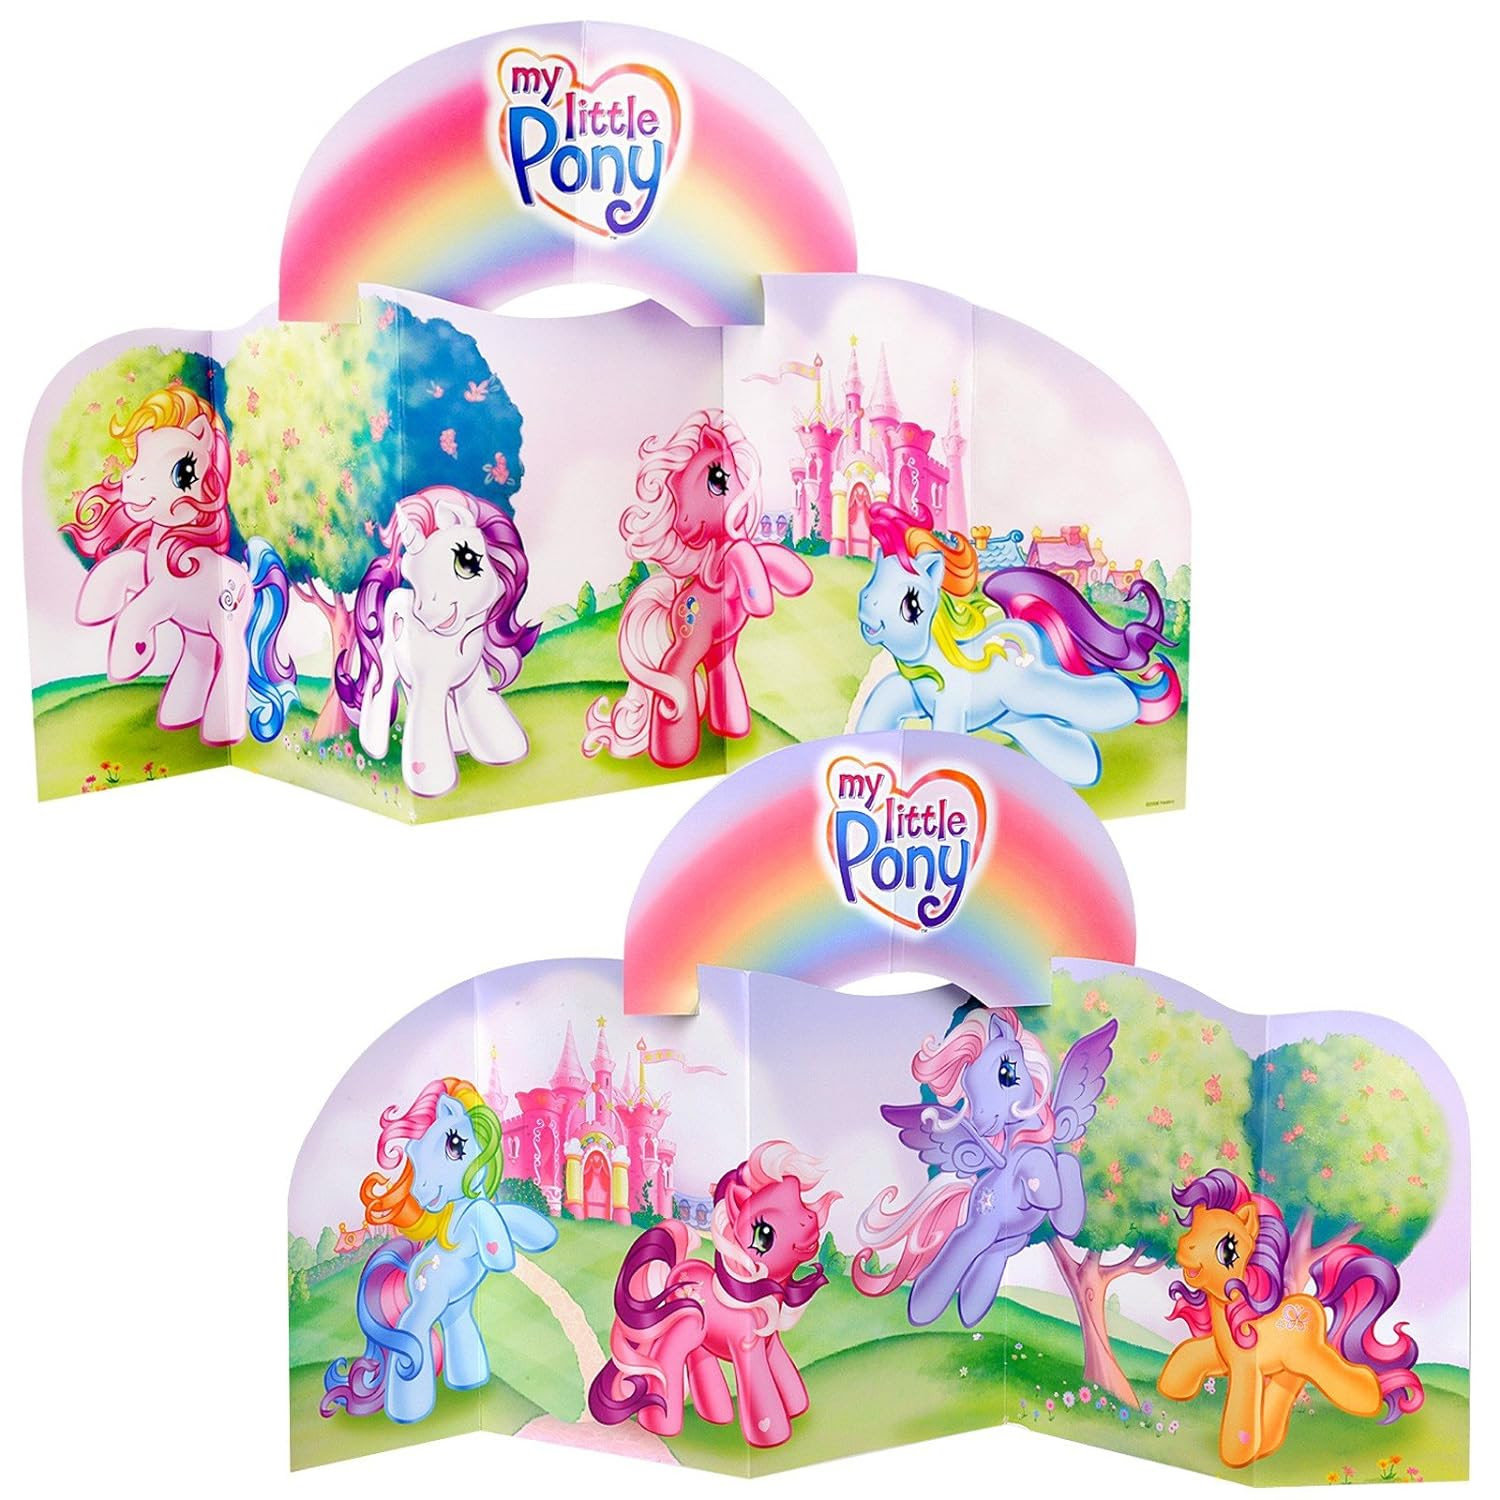 My Little Pony Table Decorations and Centerpieces | Birthday Girls Wikii